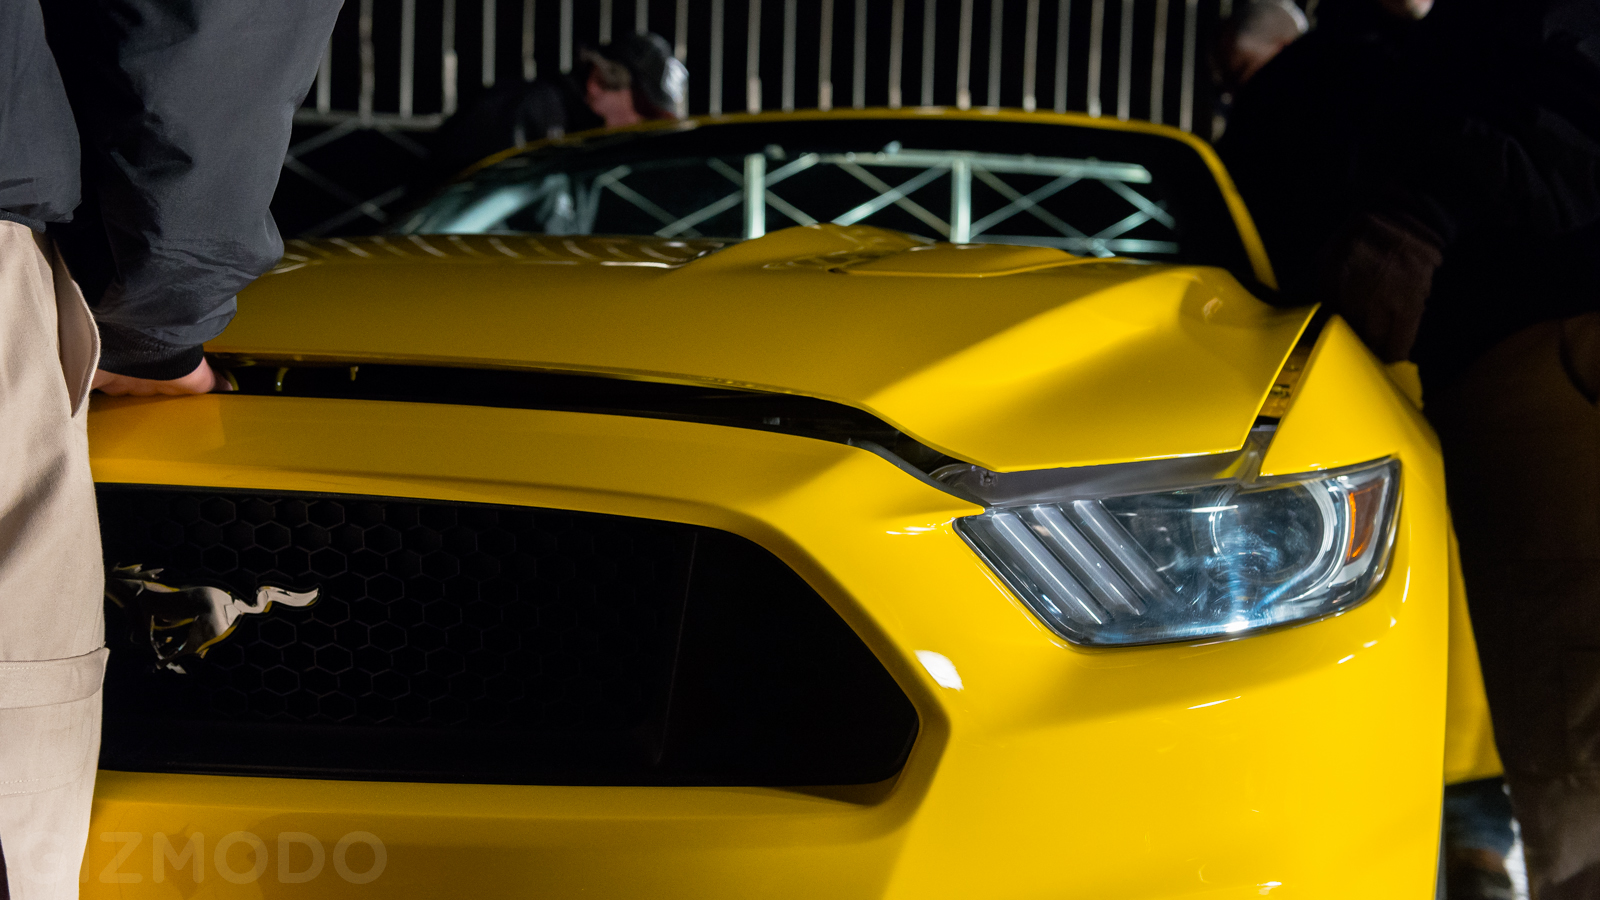 Ford Built A Mustang On Top Of The Empire State Building Last Night